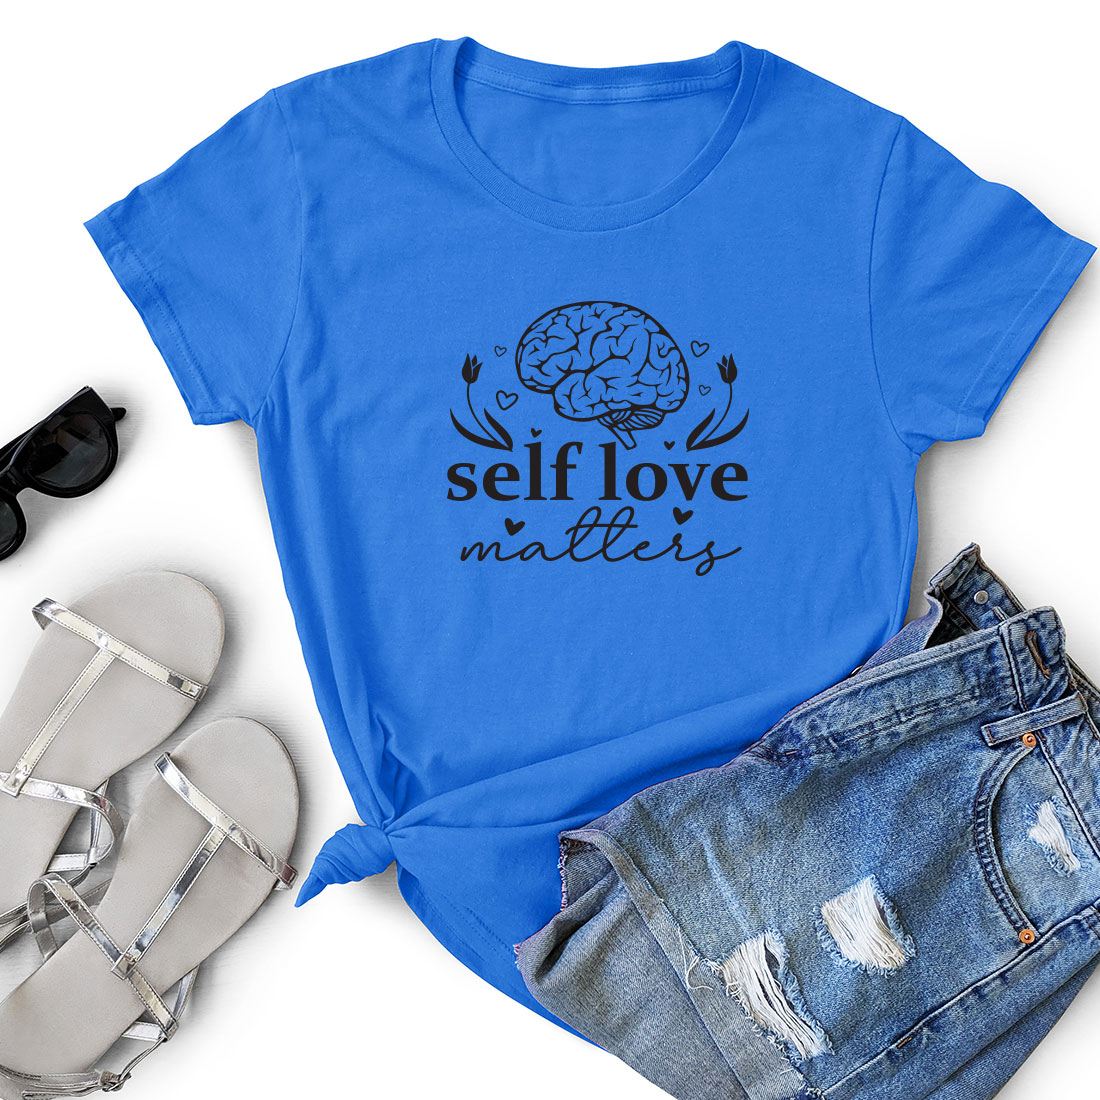 T - shirt that says self love matters next to a pair of shorts.